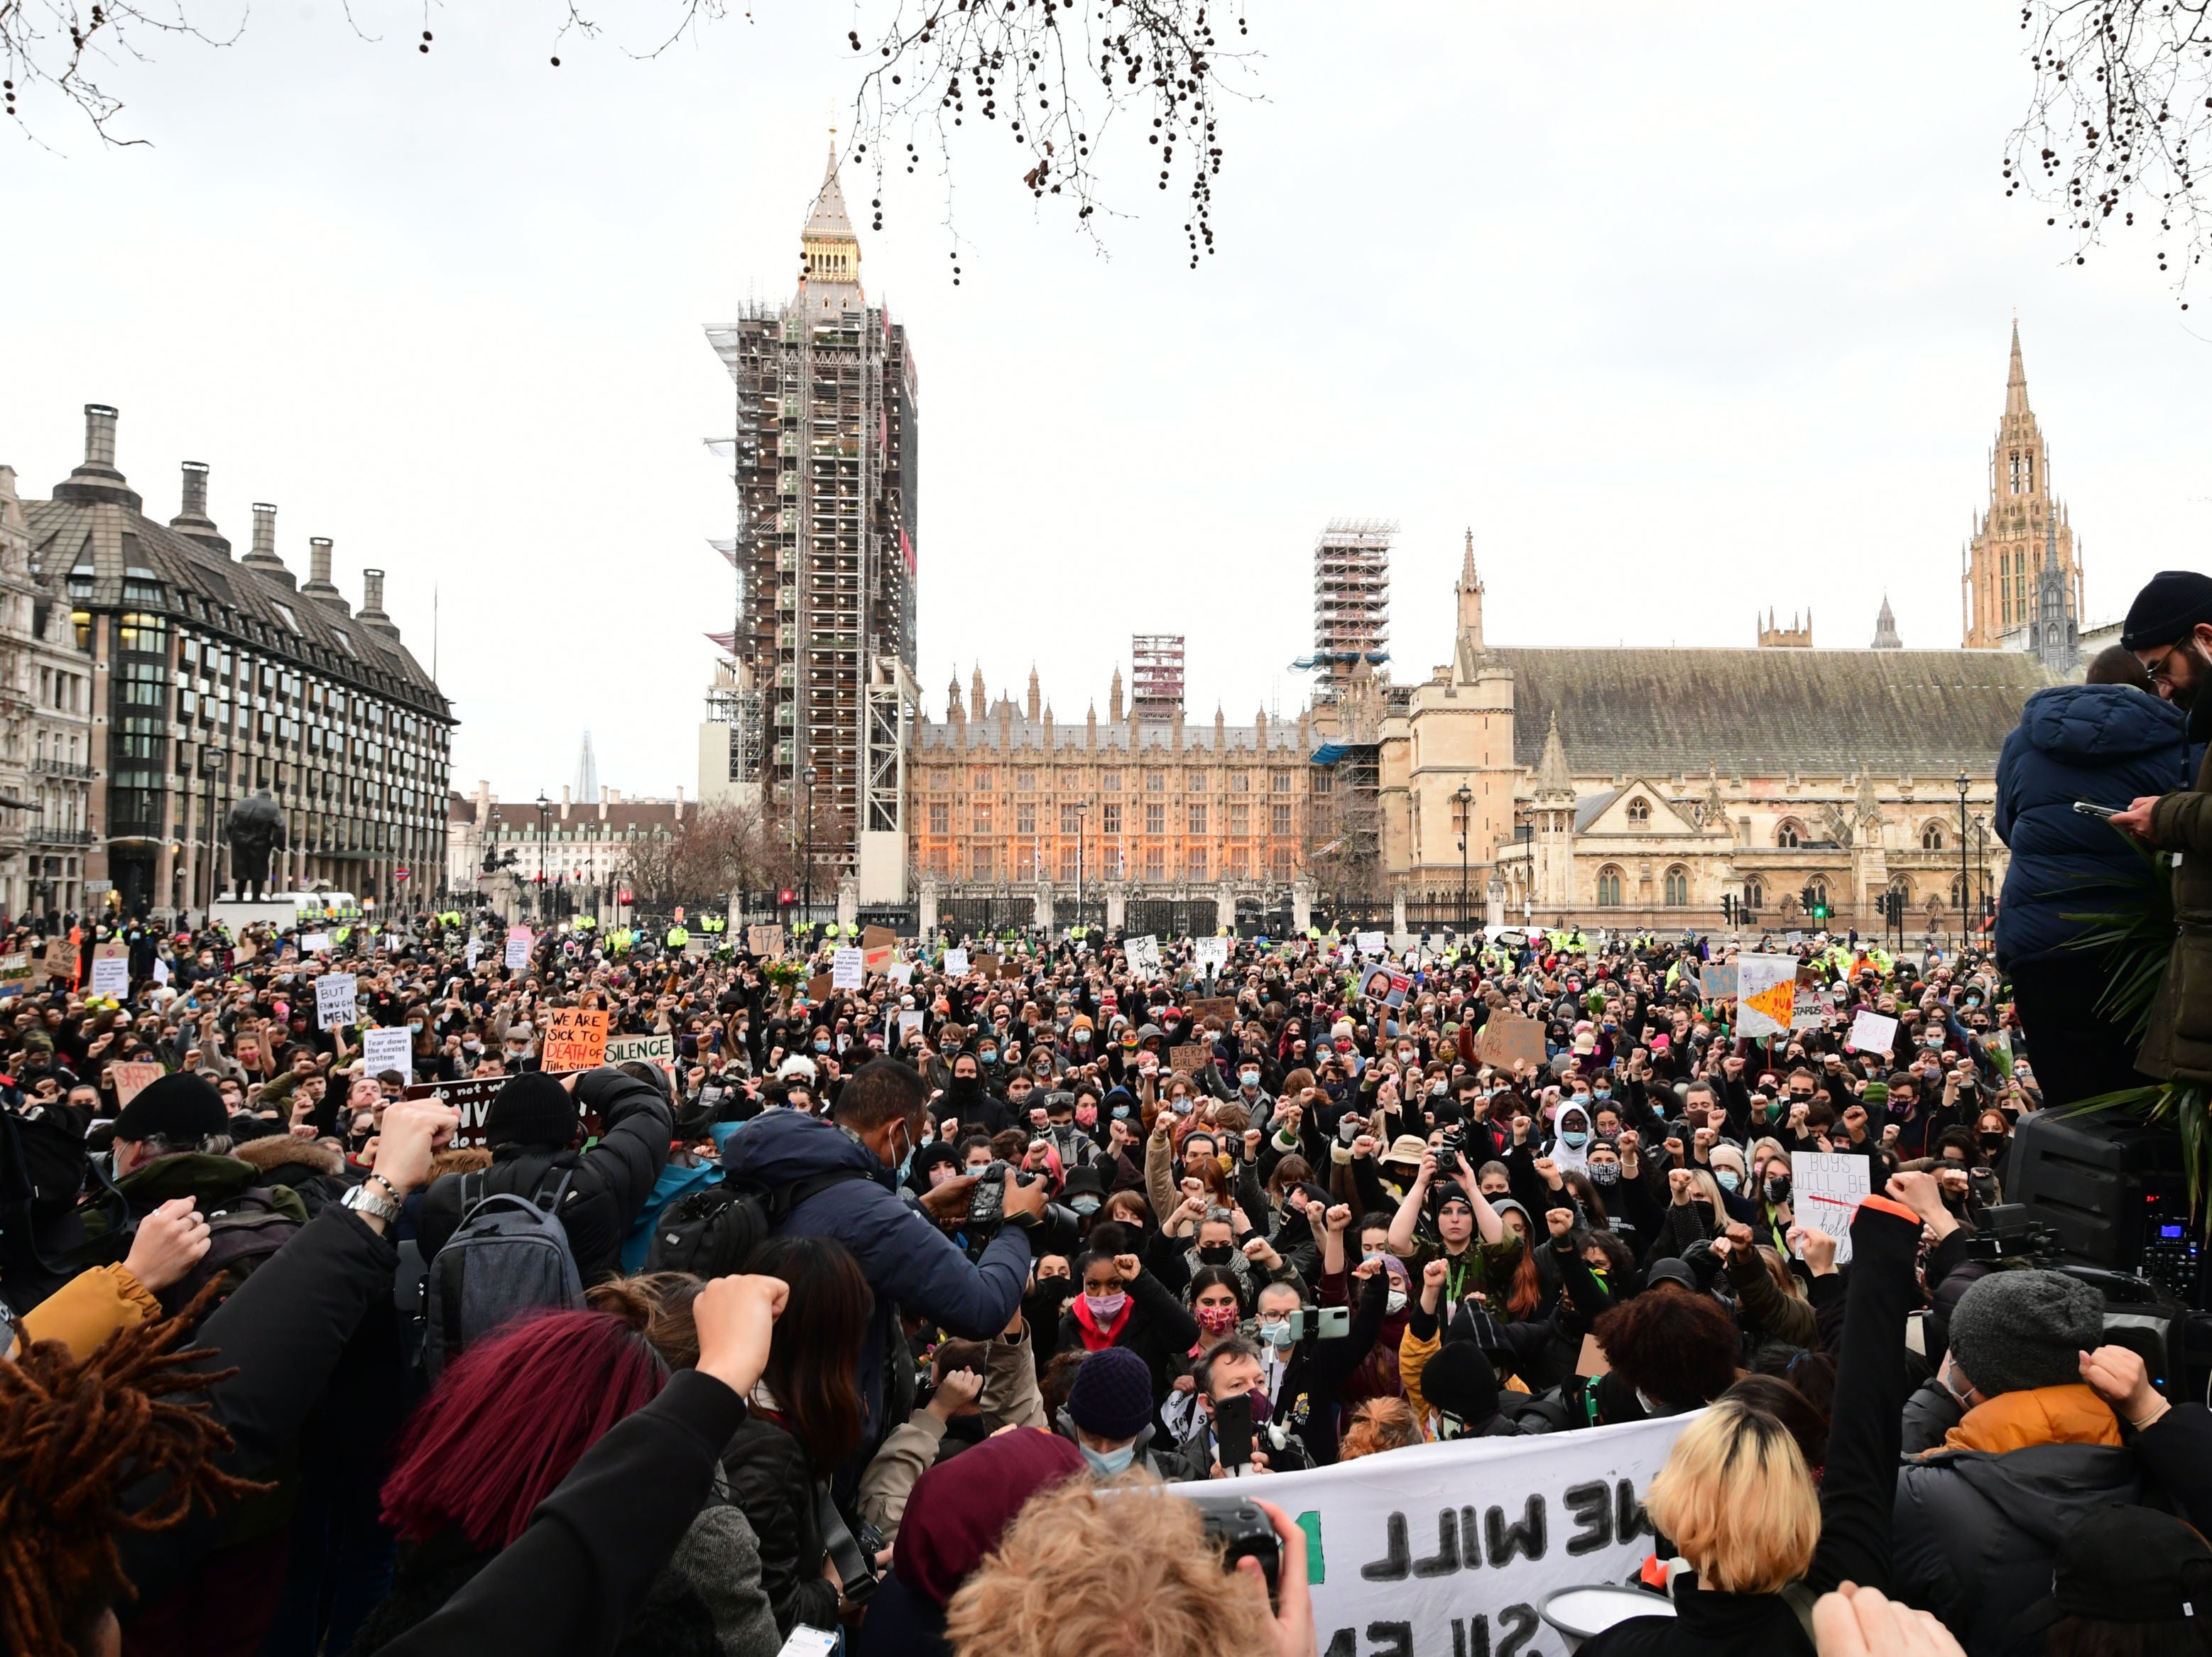 Demonstrators in Parliament Square, central London, during a protest in memory of Sarah Everard